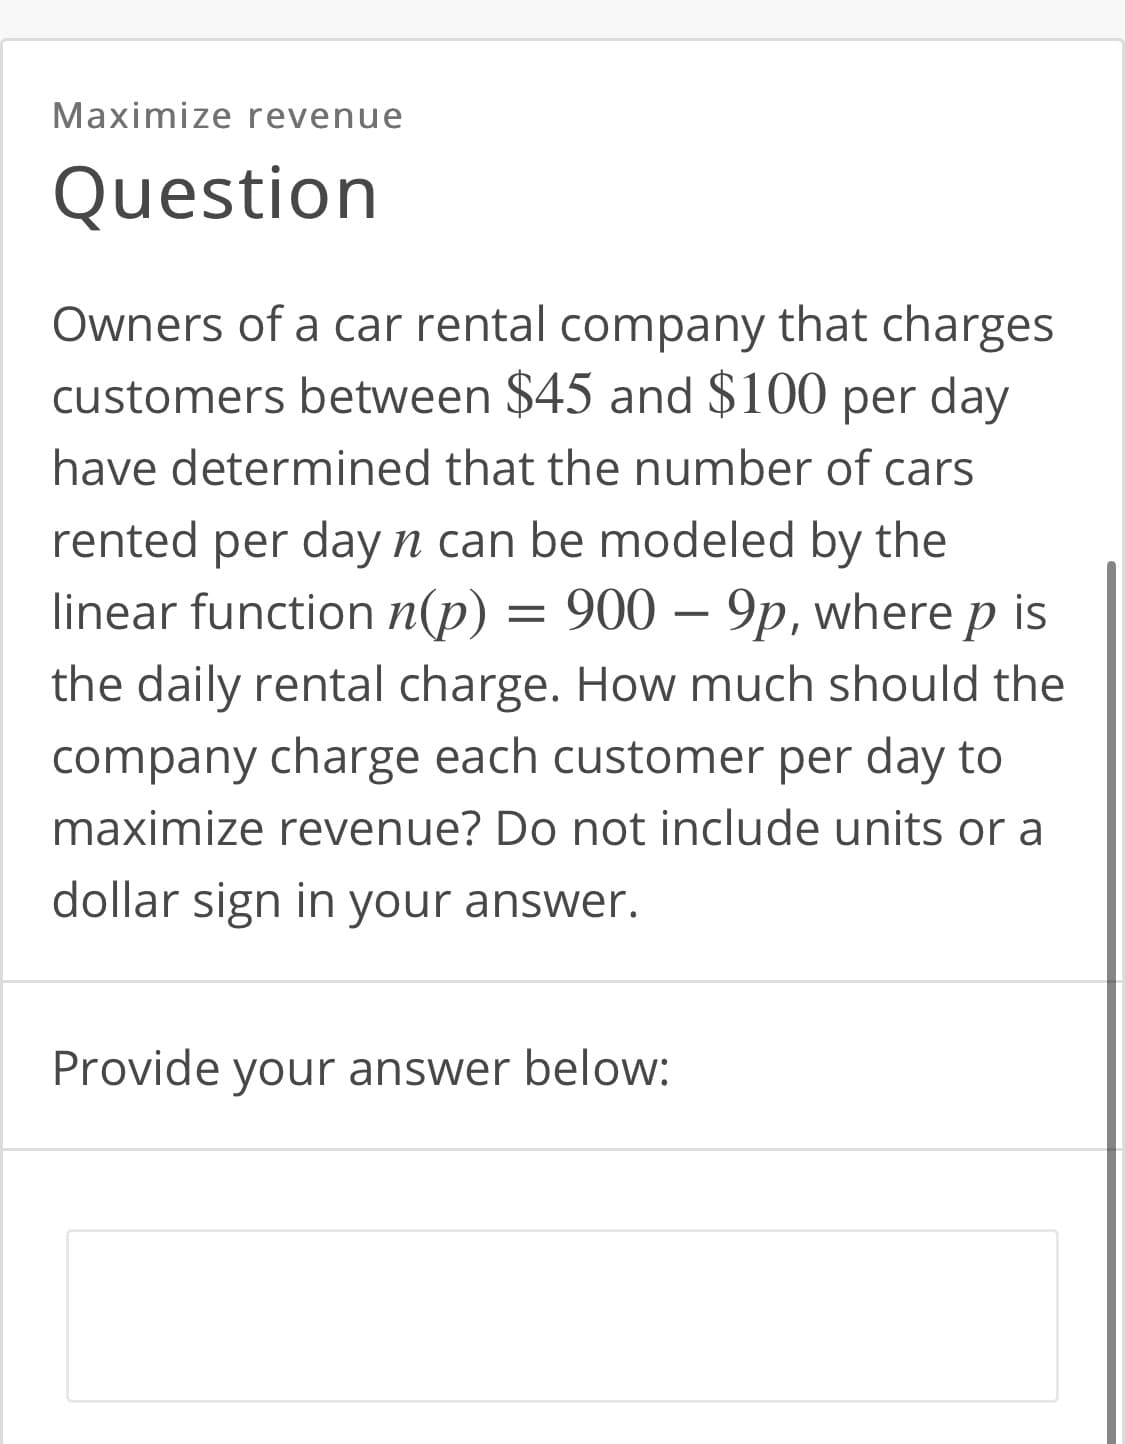 Maximize revenue
Question
Owners of a car rental company that charges
customers between $45 and $100 per day
have determined that the number of cars
rented per day n can be modeled by the
linear function n(p) = 900 – 9p, where p is
the daily rental charge. How much should the
company charge each customer per day to
maximize revenue? Do not include units or a
dollar sign in your answer.
Provide your answer below:
